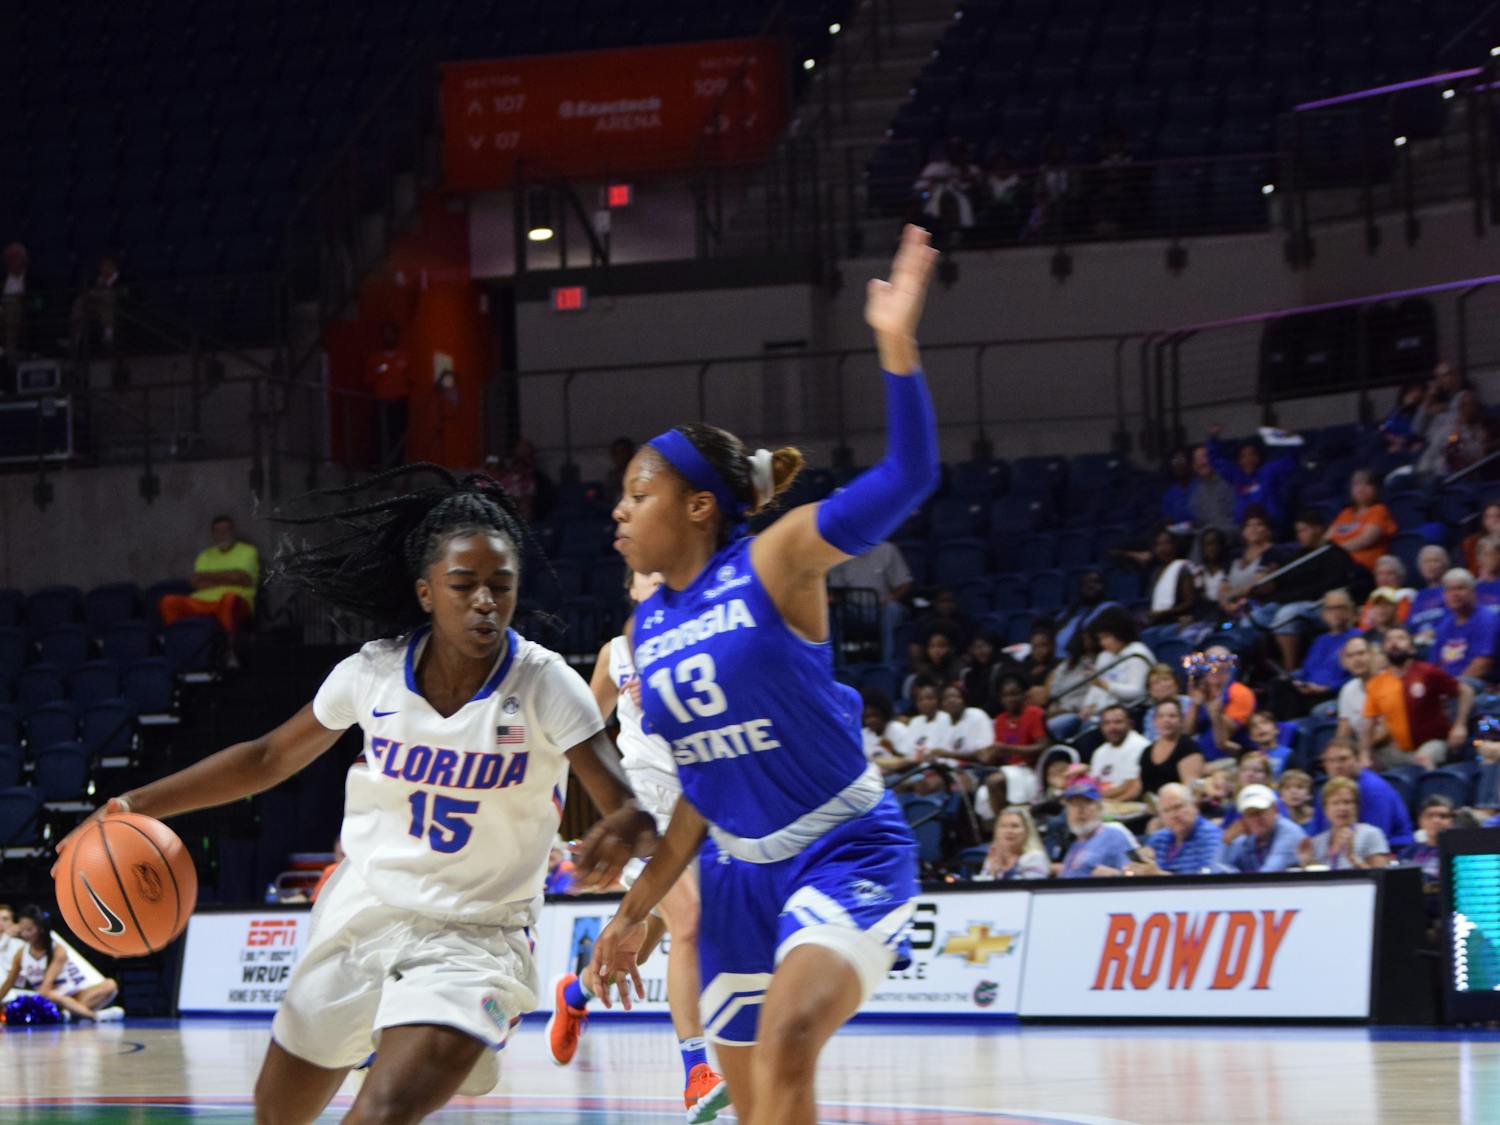 Searcy, filling in for Funda Nakkasoglu, turned in a valiant attempt at replacing the Gators’ leading scorer in Florida's 85-71 loss to Stetson. She made 4-of-8 from the floor, including three buckets from beyond the arc in her first start of her career.